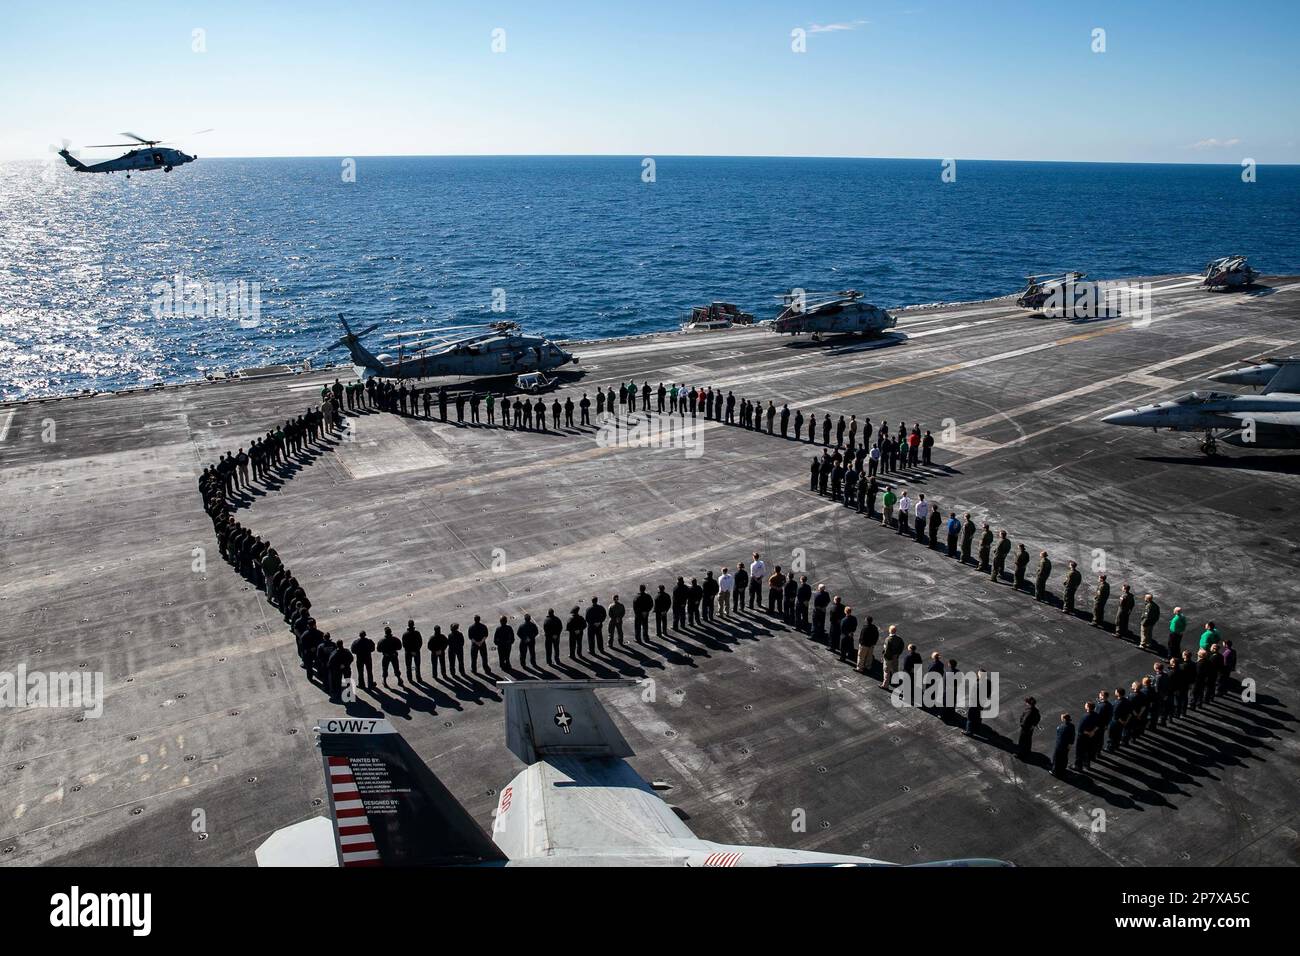 230307-N-MZ309-1046 ADRIATIC SEA (March 7, 2023) Sailors assigned to the George H.W. Bush Carrier Strike Group (CSG) pose for a photo in the shape of Texas on the flight deck of the Nimitz-class aircraft carrier USS George H.W. Bush (CVN 77), March 7, 2023. The George H.W. Bush CSG is on a scheduled deployment in the U.S. Naval Forces Europe area of operations, employed by U.S. Sixth Fleet to defend U.S., allied, and partner interests. (U.S. Navy photo by Mass Communication Specialist 1st Class Ryan Riley) Stock Photo